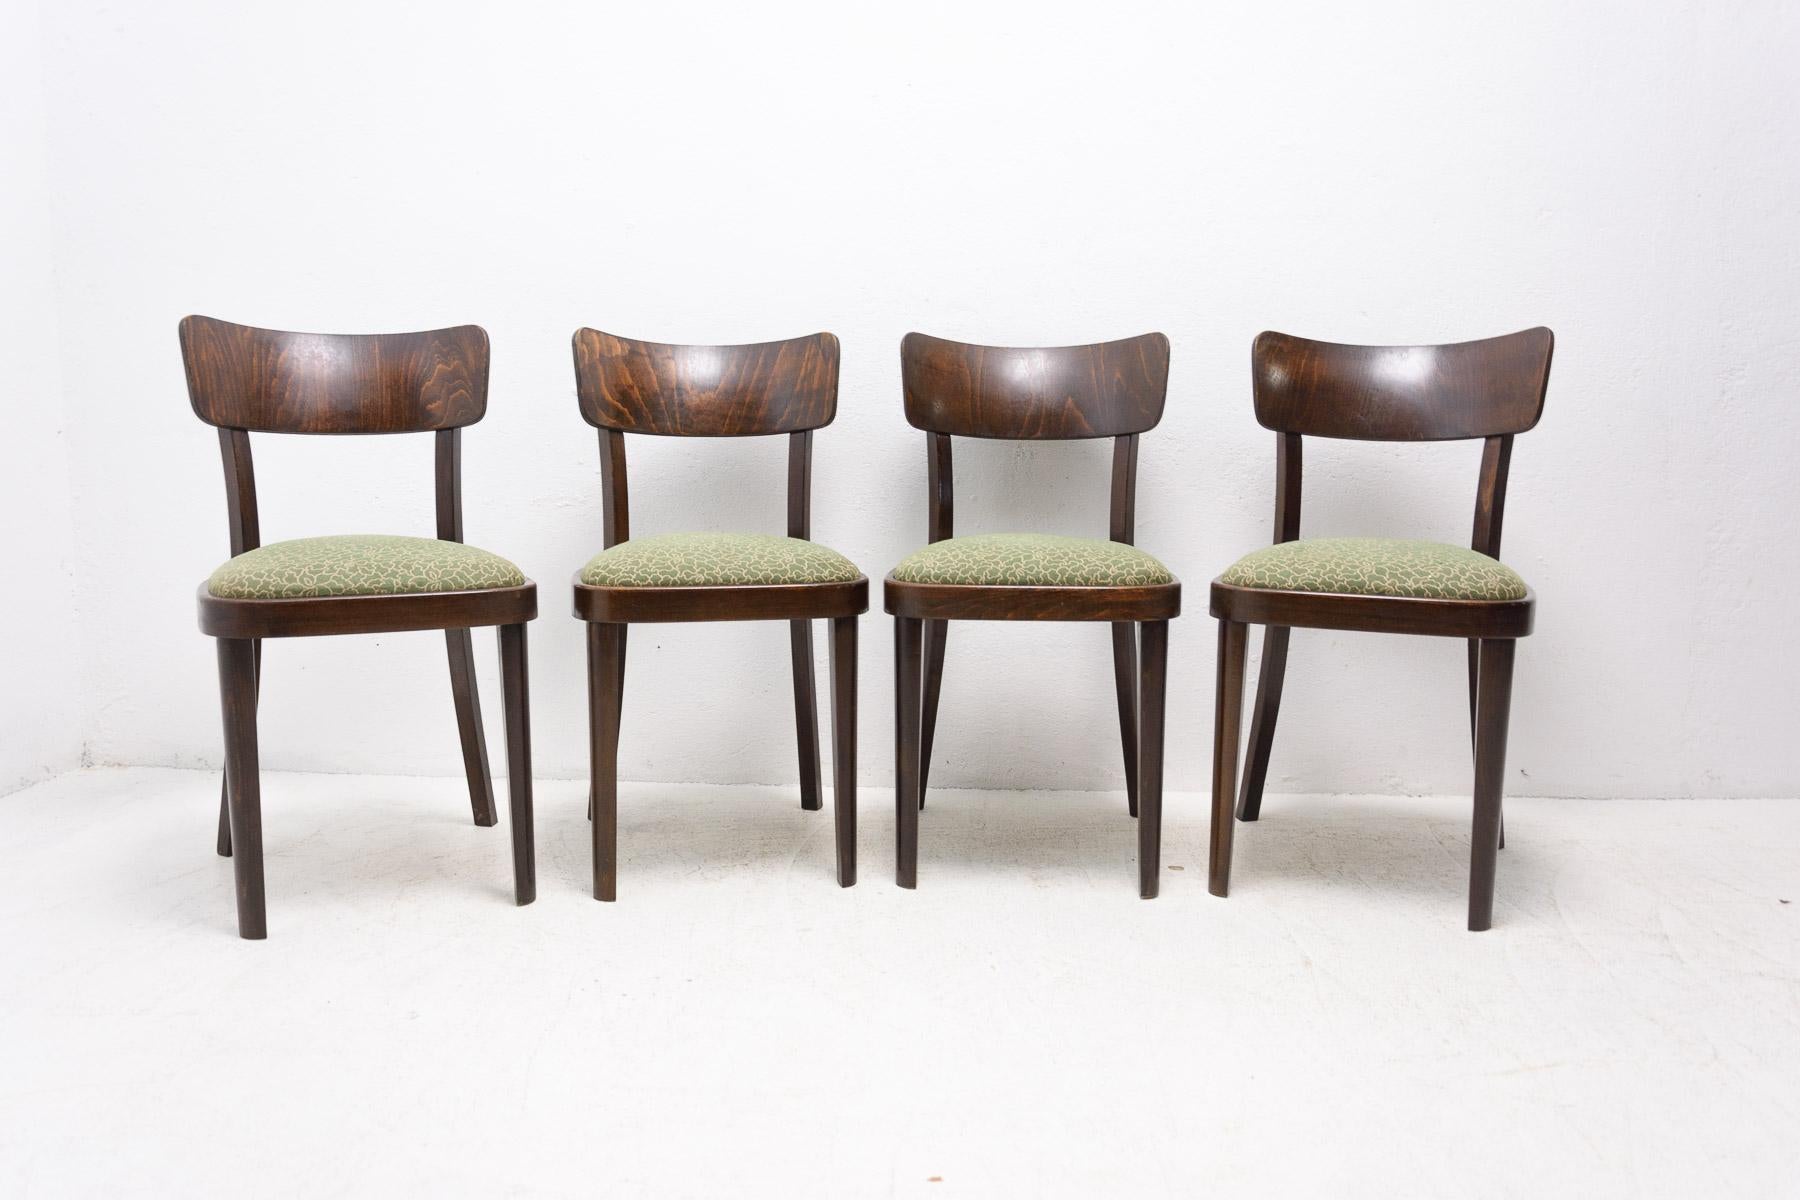 Dining chairs Thonet, made in Czechoslovakia 1950´s. Walnut veneer, upholstered seats. In very good Vintage condition, with wear appropriate for the age of chairs. Price is for the set of four.

Measures: Height: 82 cm

Seat: 44 × 42 cm

Seat